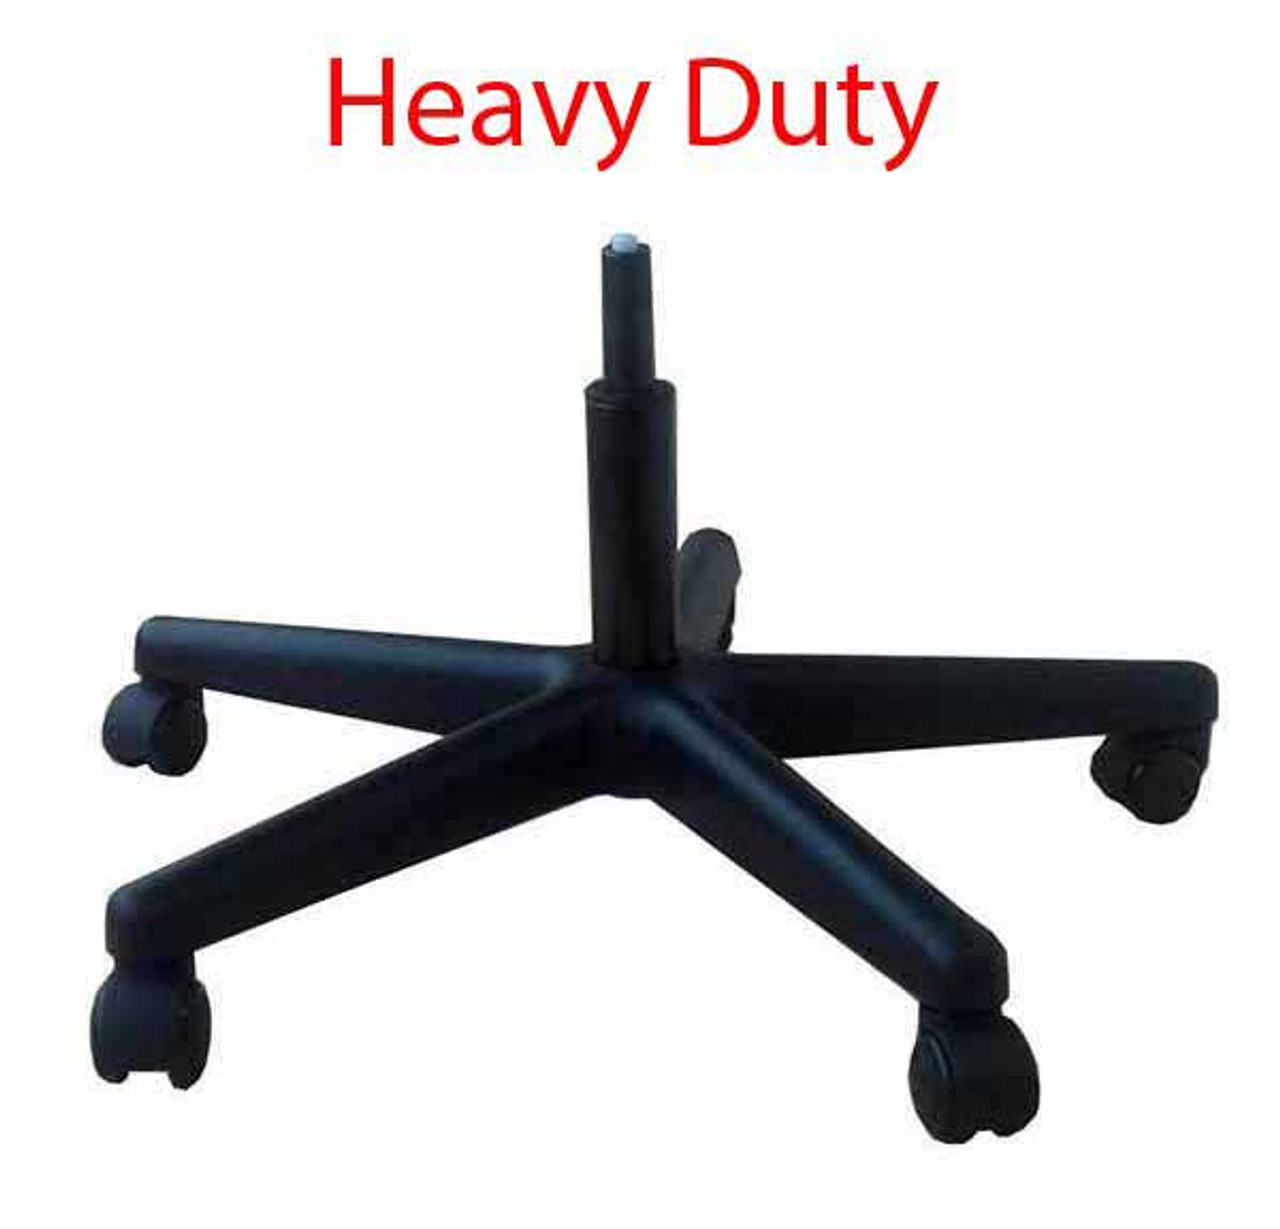 https://cdn11.bigcommerce.com/s-8fb2b/images/stencil/1280x1280/products/616/1487/heavy-duty-parts-for-office-chair__54834.1522173029.jpg?c=2